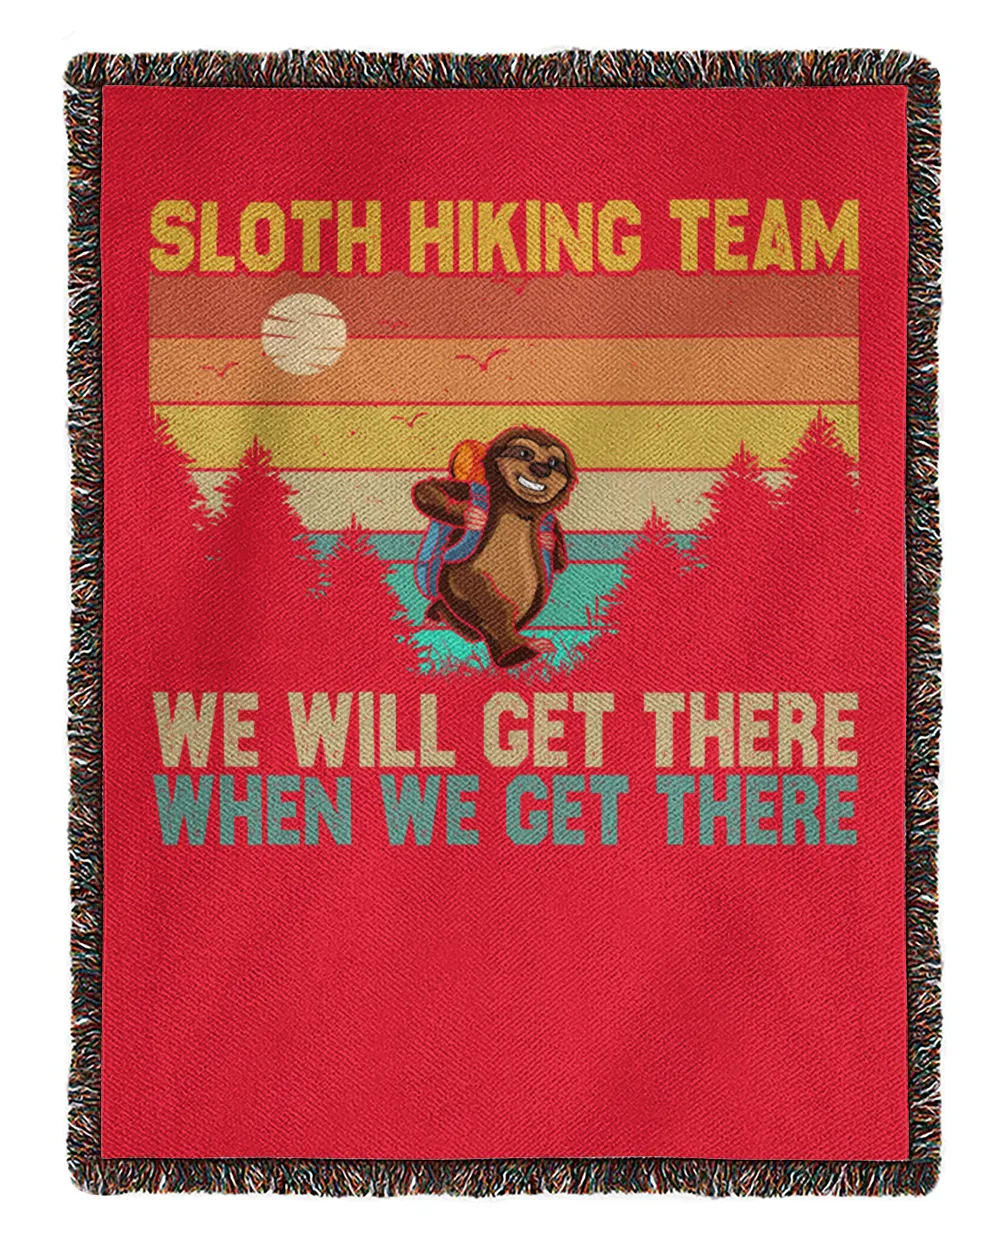 Sloth Hiking Team We Will  Get There When We Get There